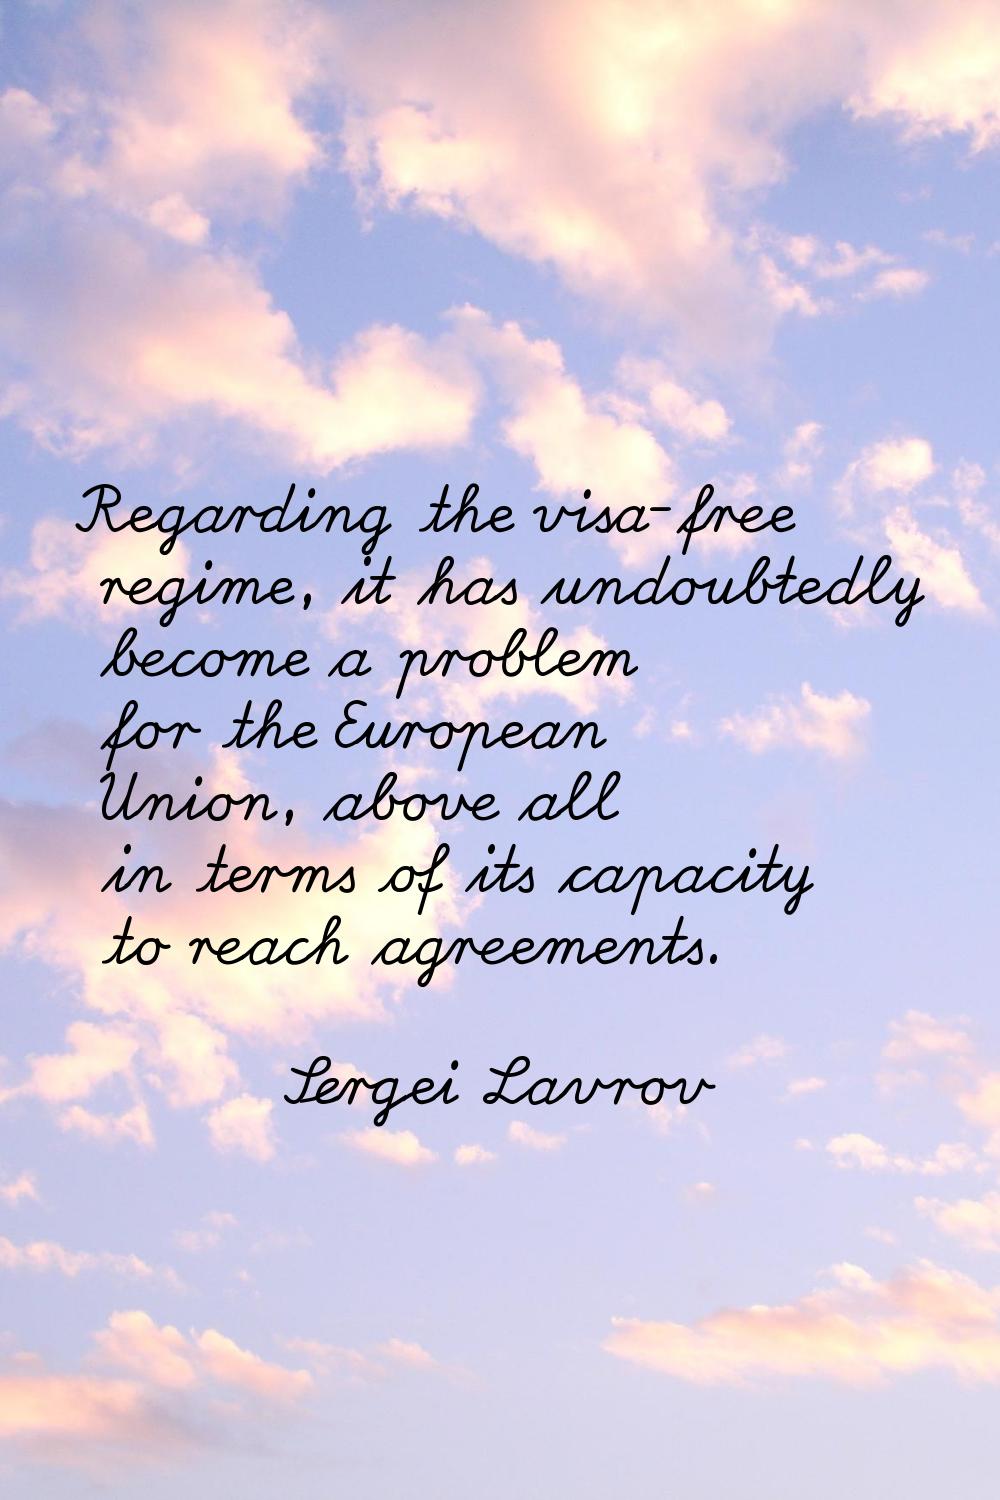 Regarding the visa-free regime, it has undoubtedly become a problem for the European Union, above a